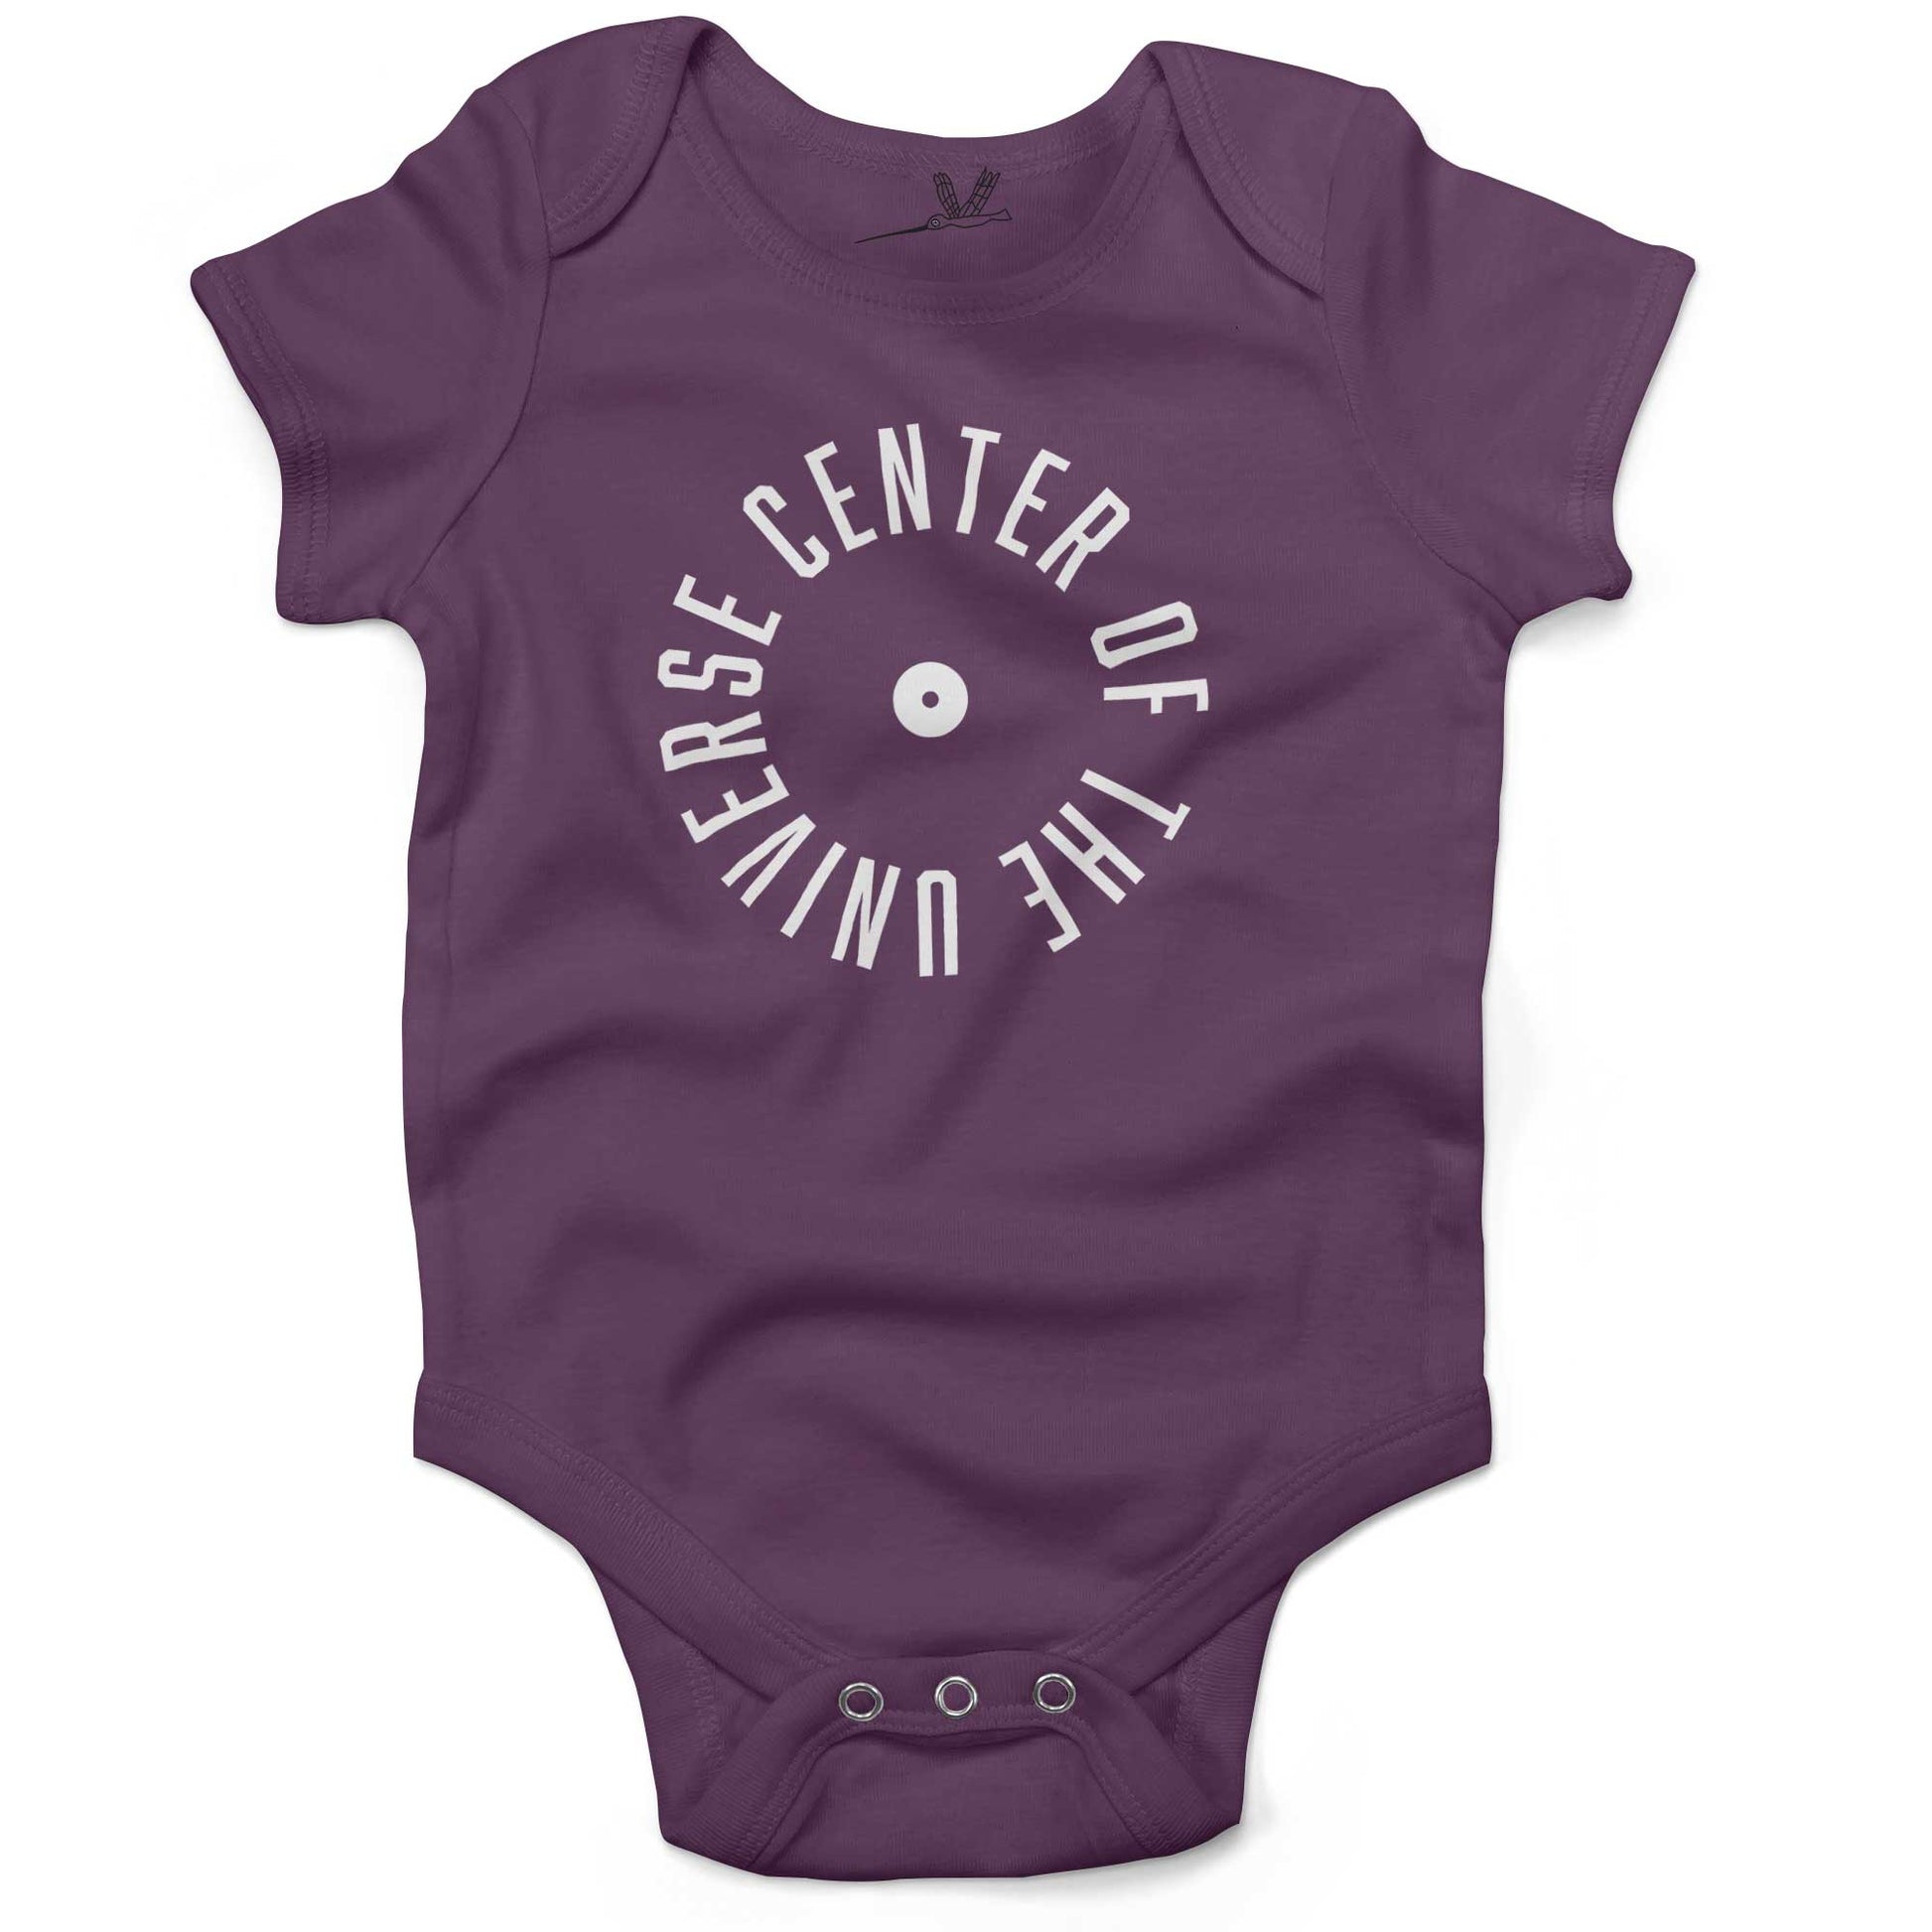 Center Of The Universe Baby One Piece or Raglan Tee-Organic Purple-3-6 months